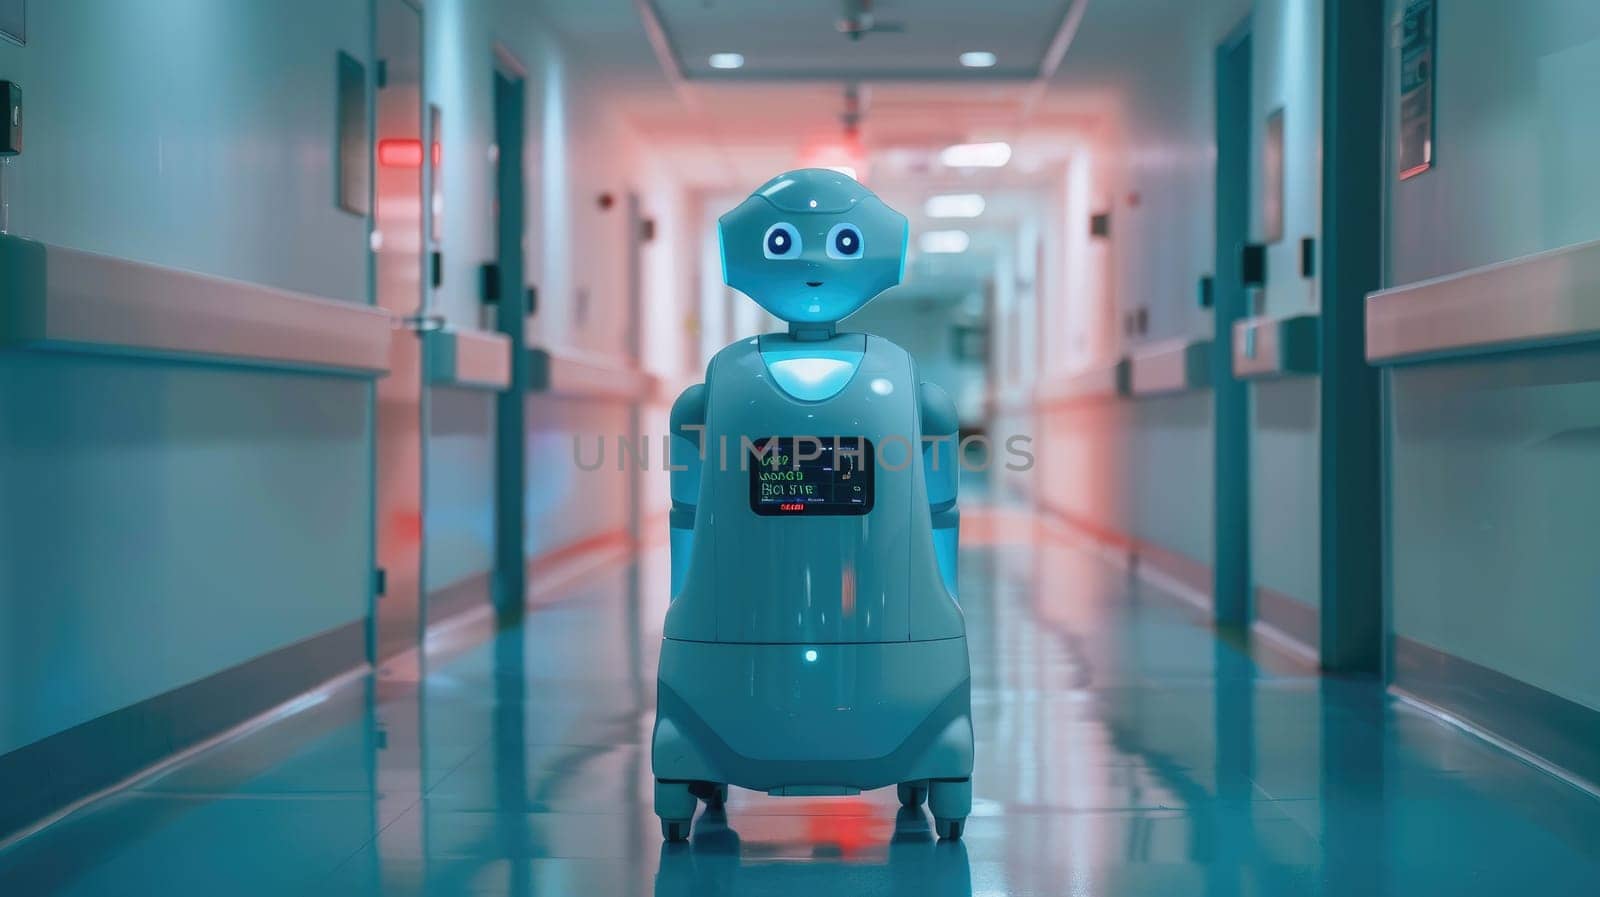 A healthcare robot in a modern hospital corrido, Automation for improved patient care by nijieimu